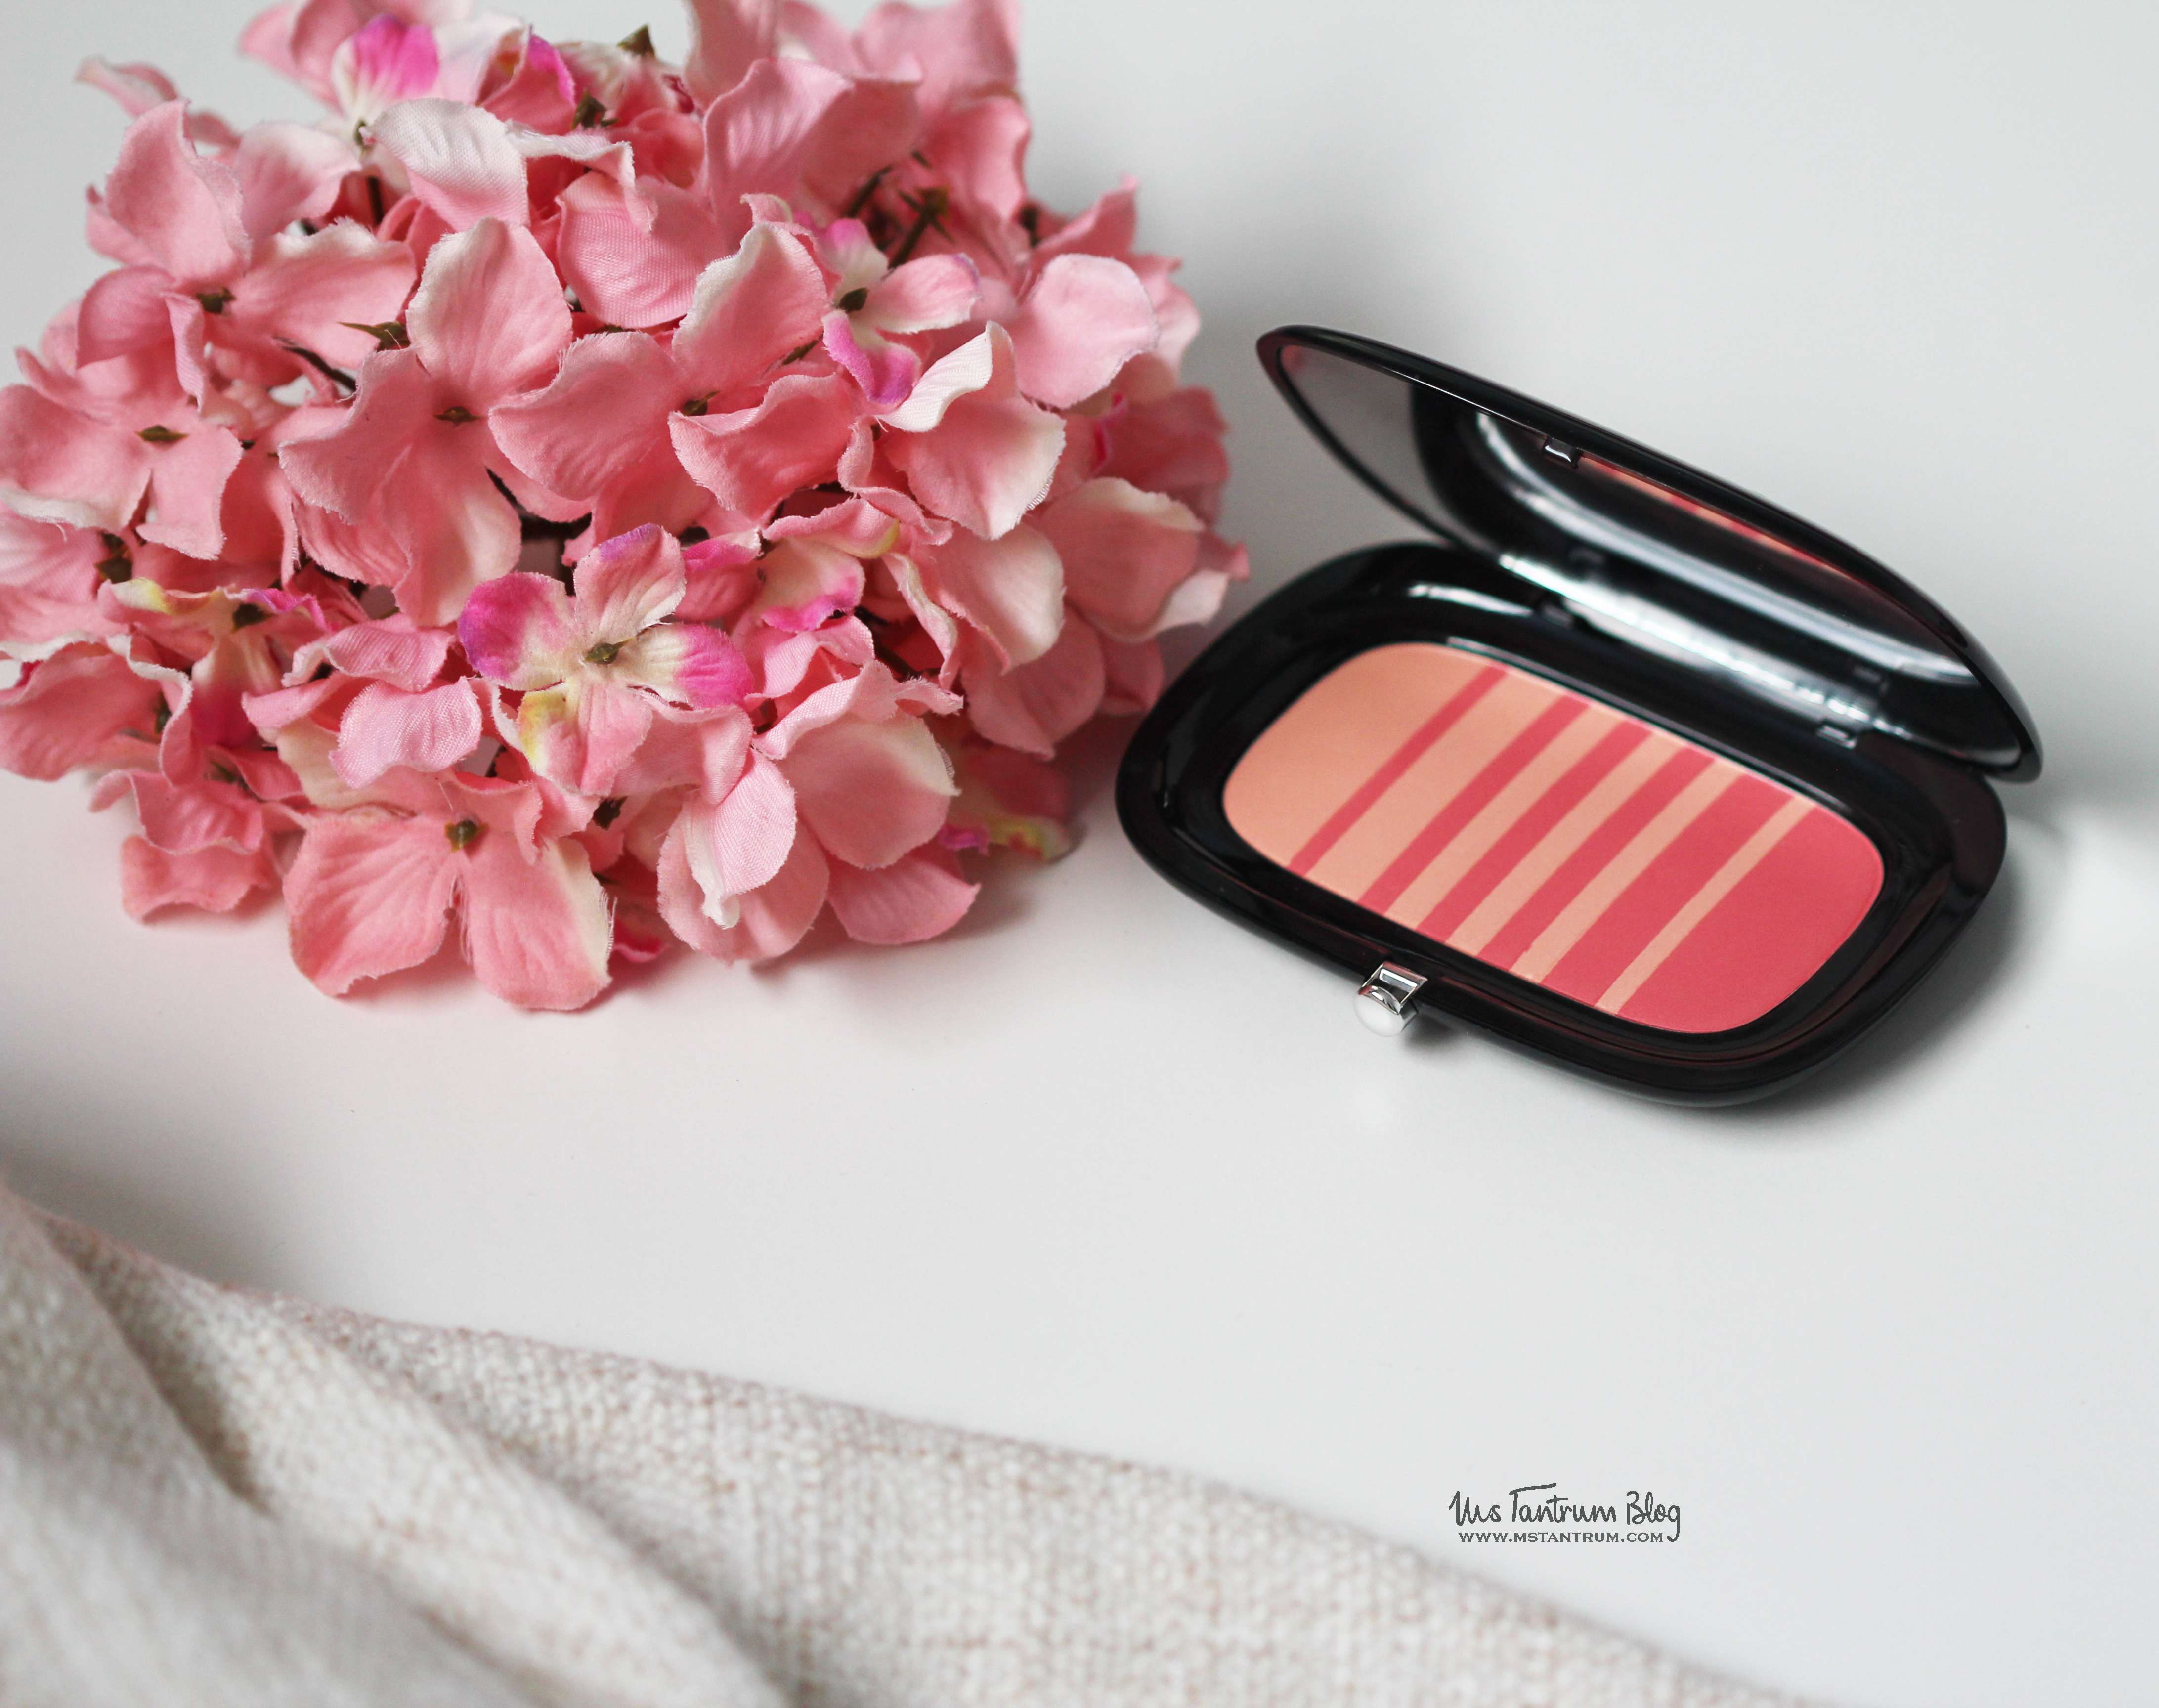 Marc Jacobs Air Blush - Lines & Last night review